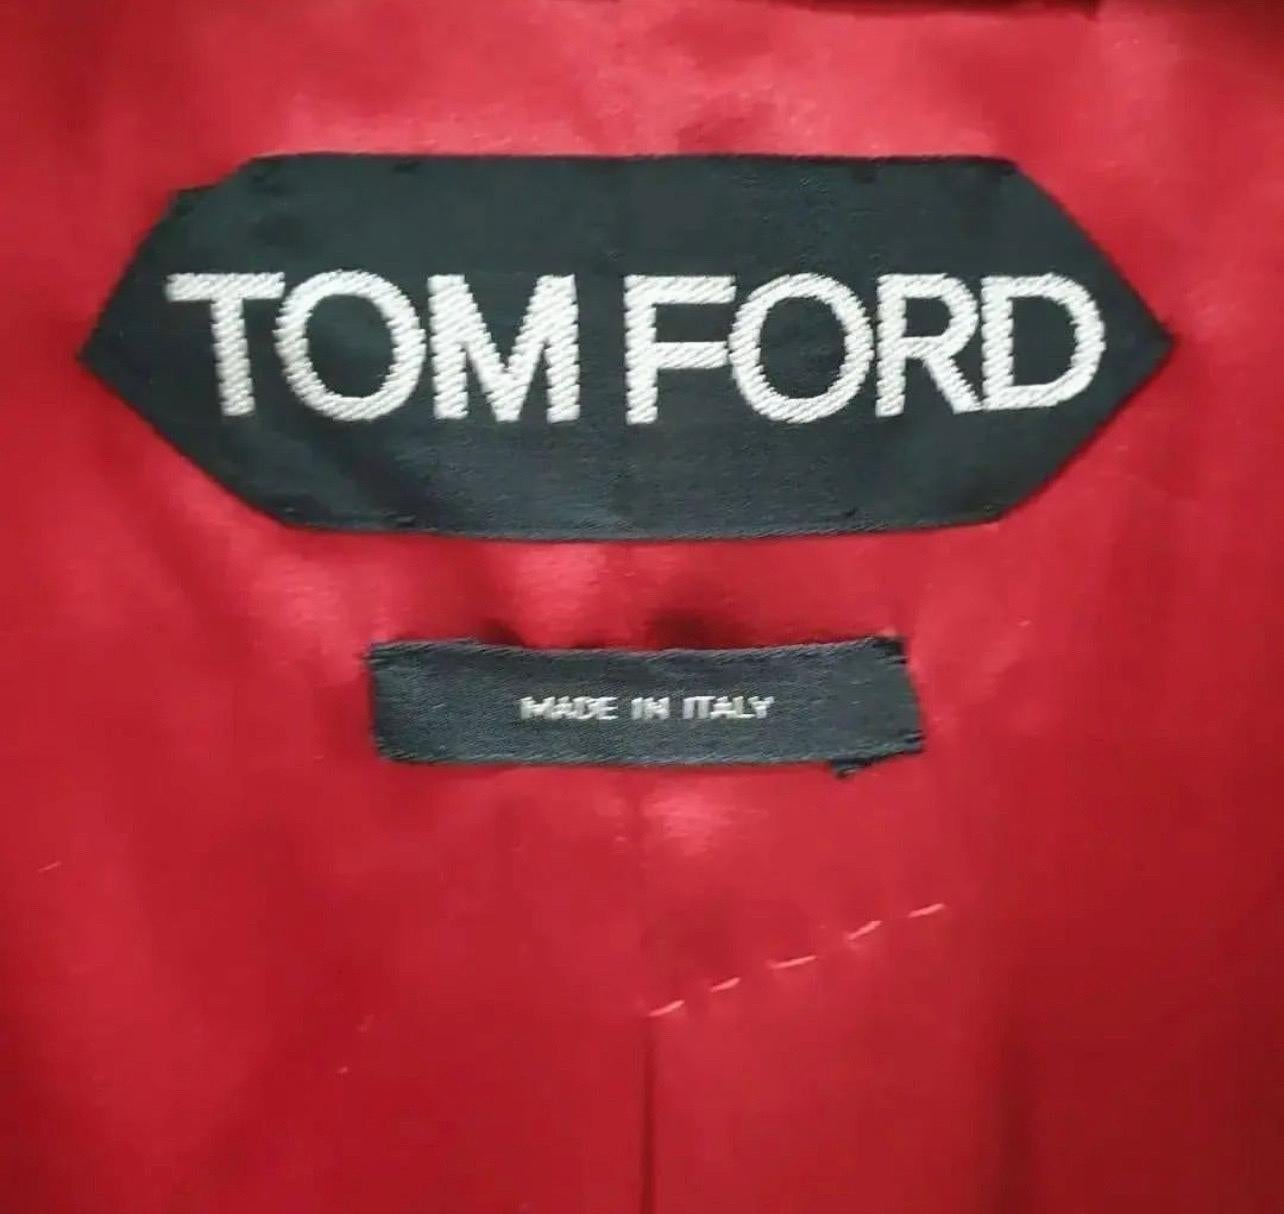 Fabric: 69% viscose / 31% cupro
Main color: red

Shelton cut
Single breasted
1 button
Shawl collar
Fully lined
Jetted pockets
Single-vented

Size 38

Condition is very good. On one sleeve buttons are missing.

Please know your size in Tom Ford